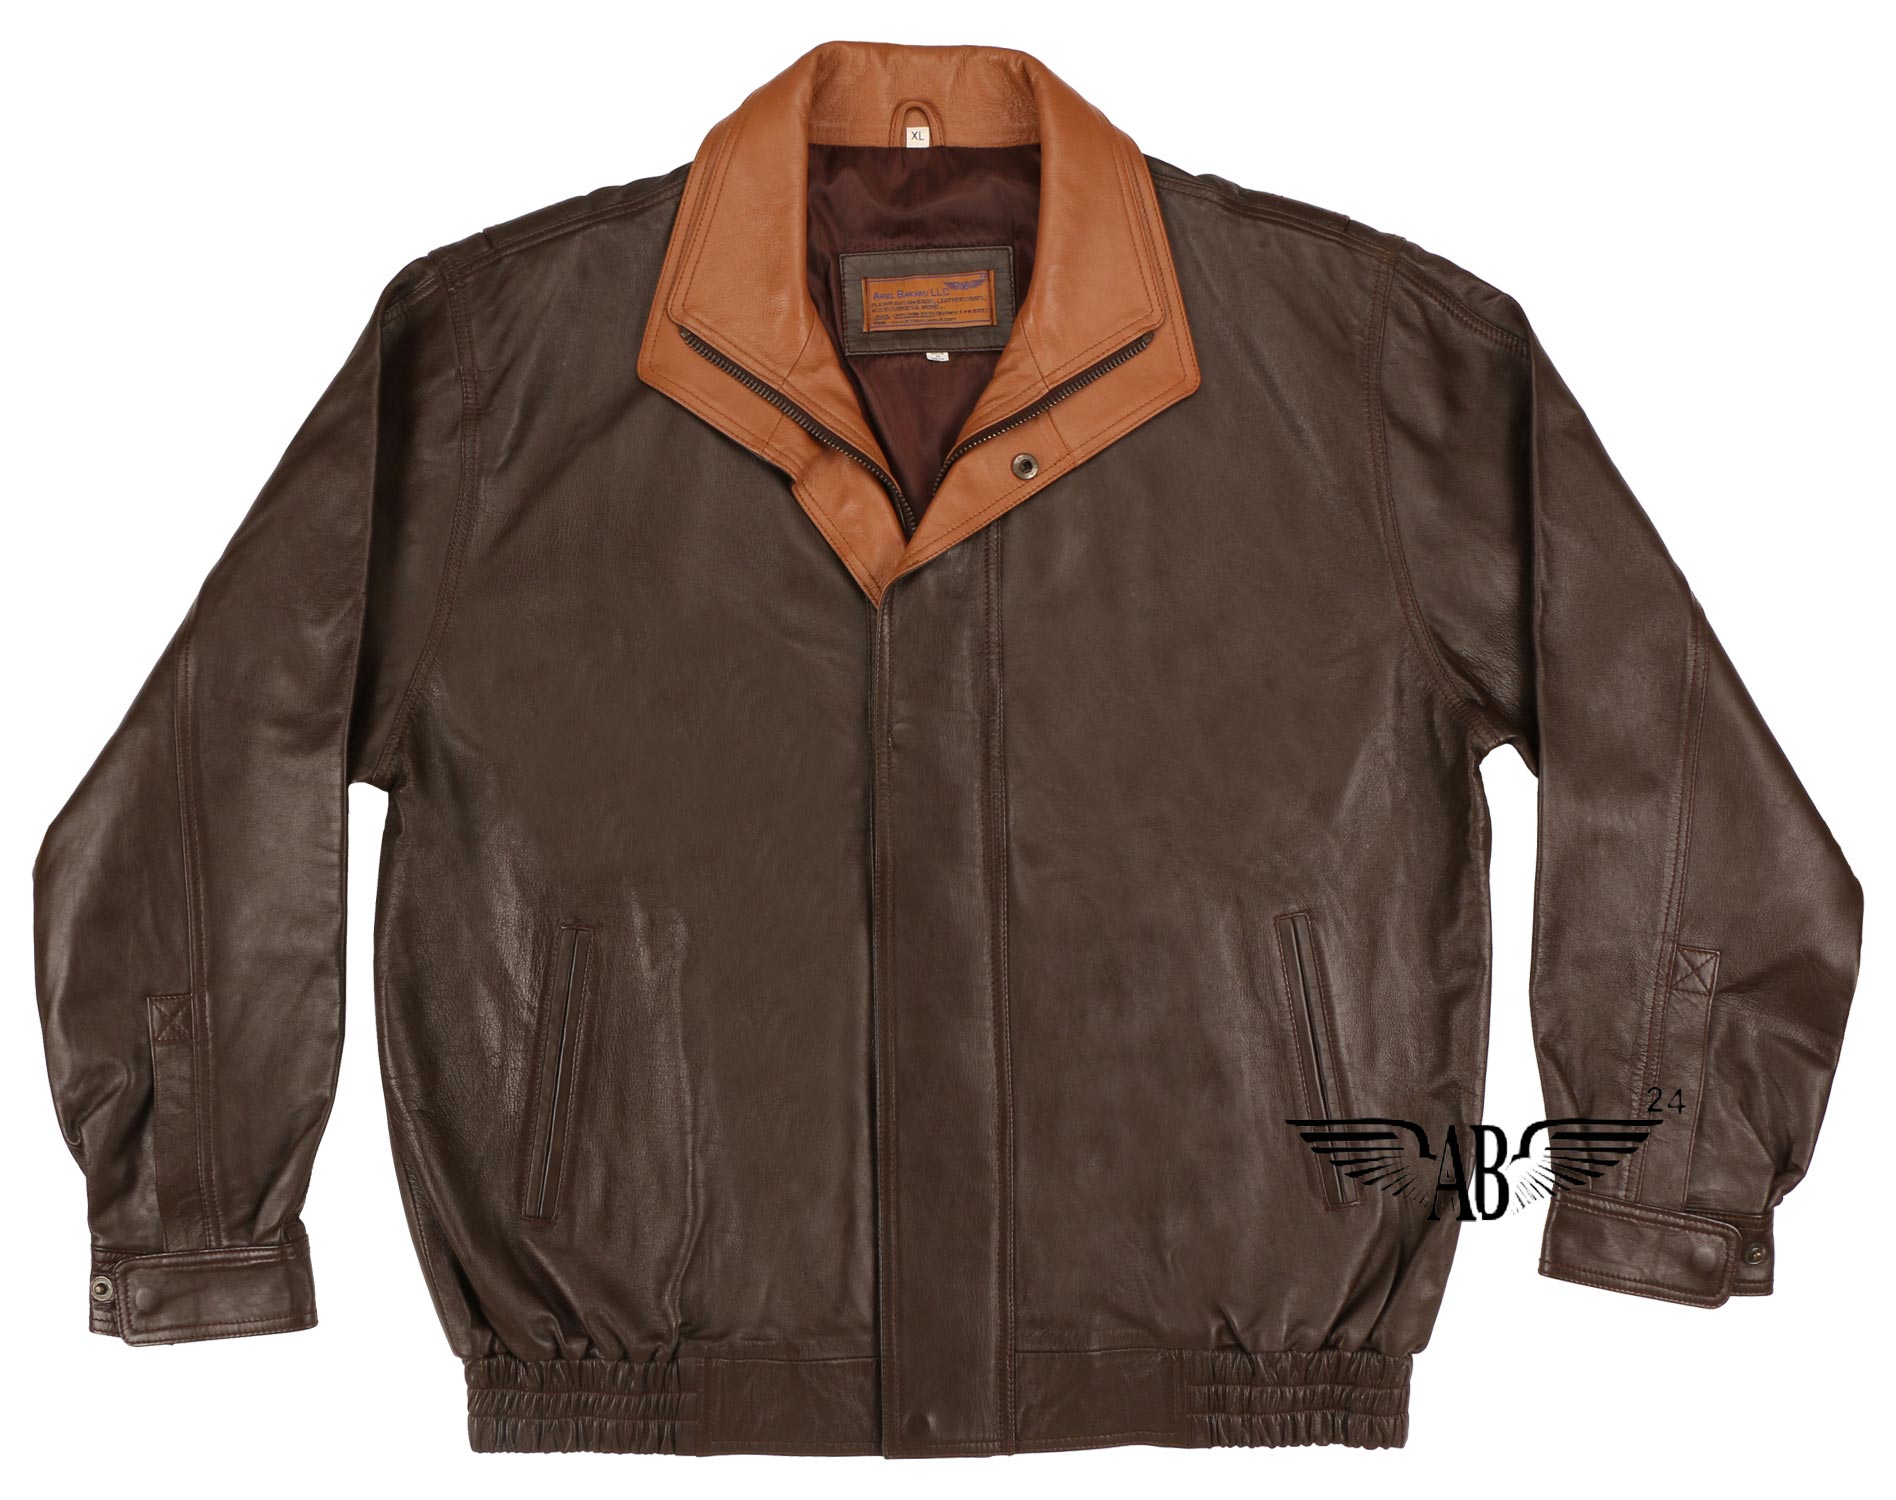 Complete front view of 2 Color Bomber Jacket.  Two side slit pockets visible.